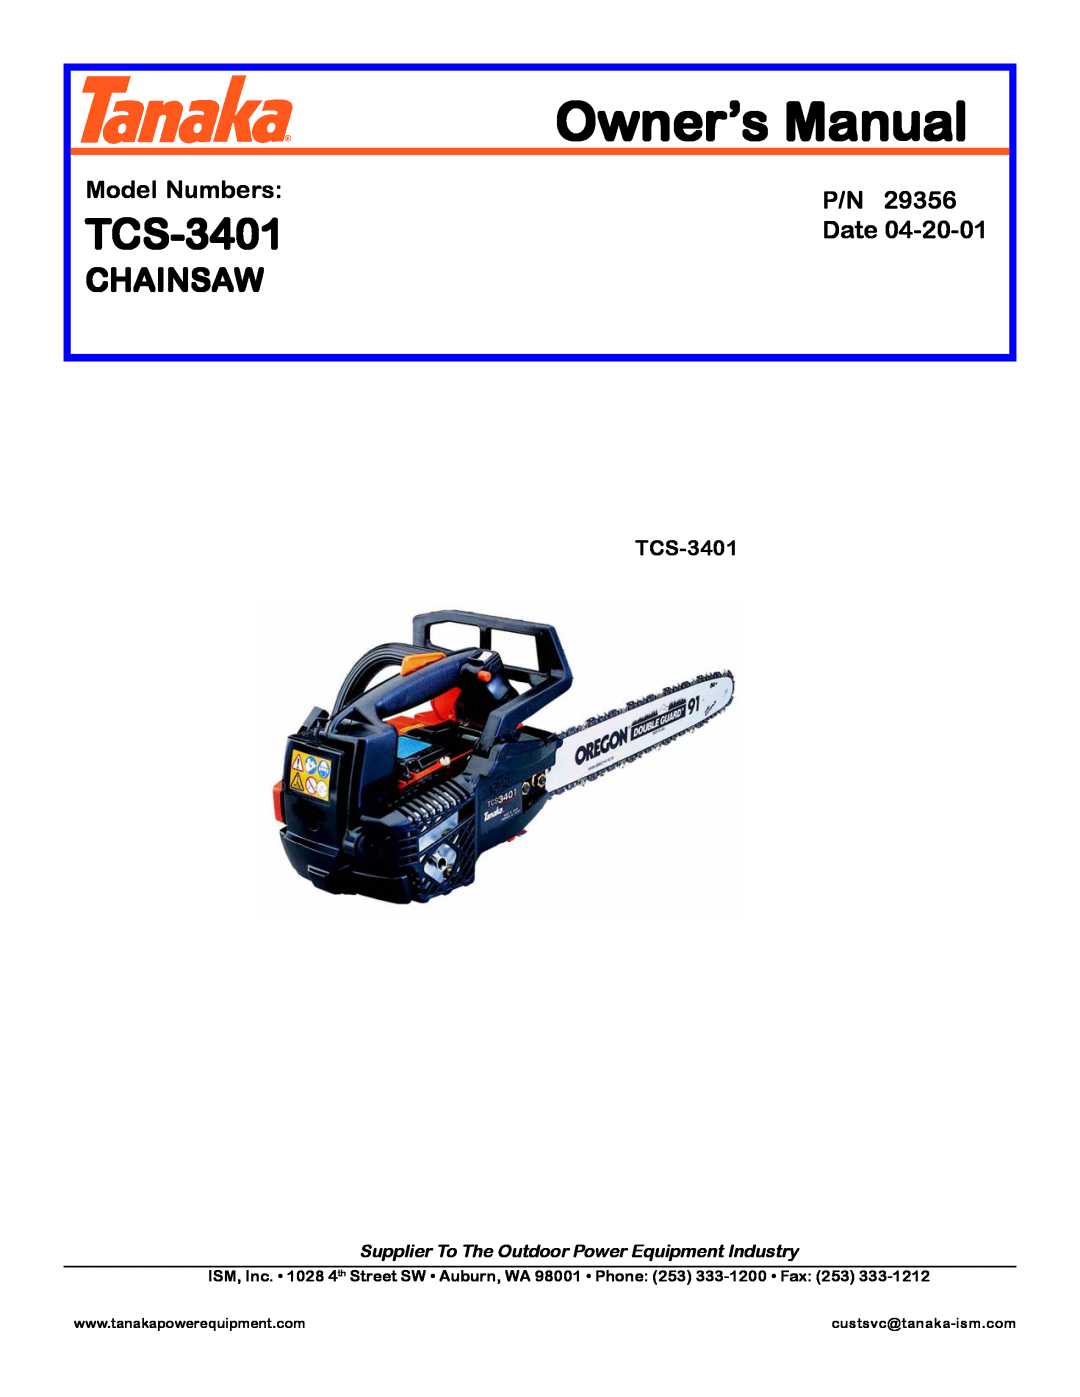 Tanaka TCS-3401 manual Chainsaw, Model Numbers, Date, Supplier To The Outdoor Power Equipment Industry 